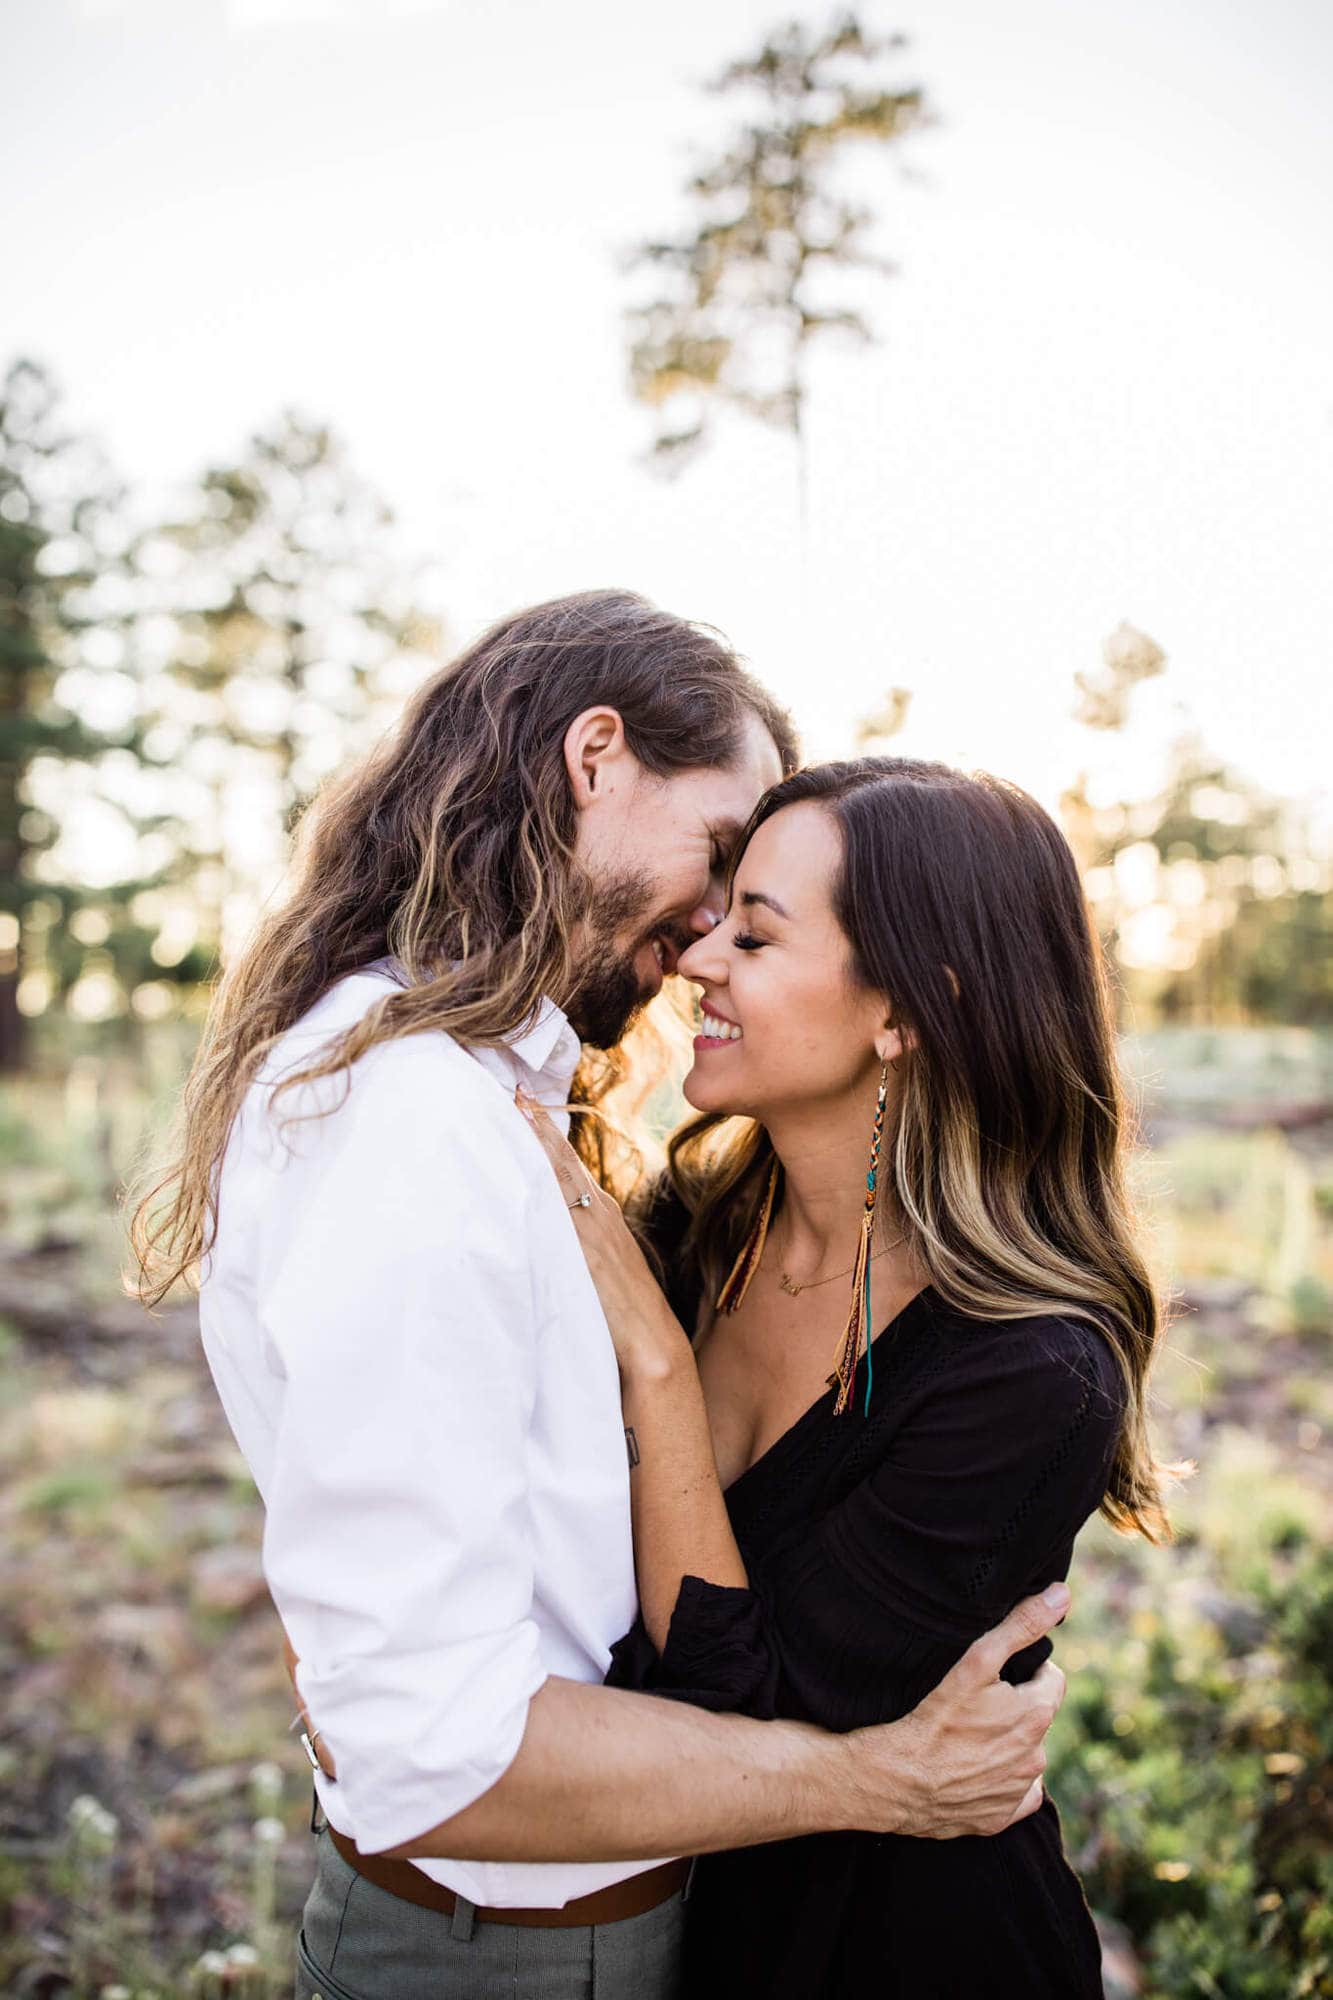 Believe it or not these adventurous Pine Forest Engagment photos were taken in Arizona. The Mogollon Rim is the perfect spot for adventure and forest vibes.